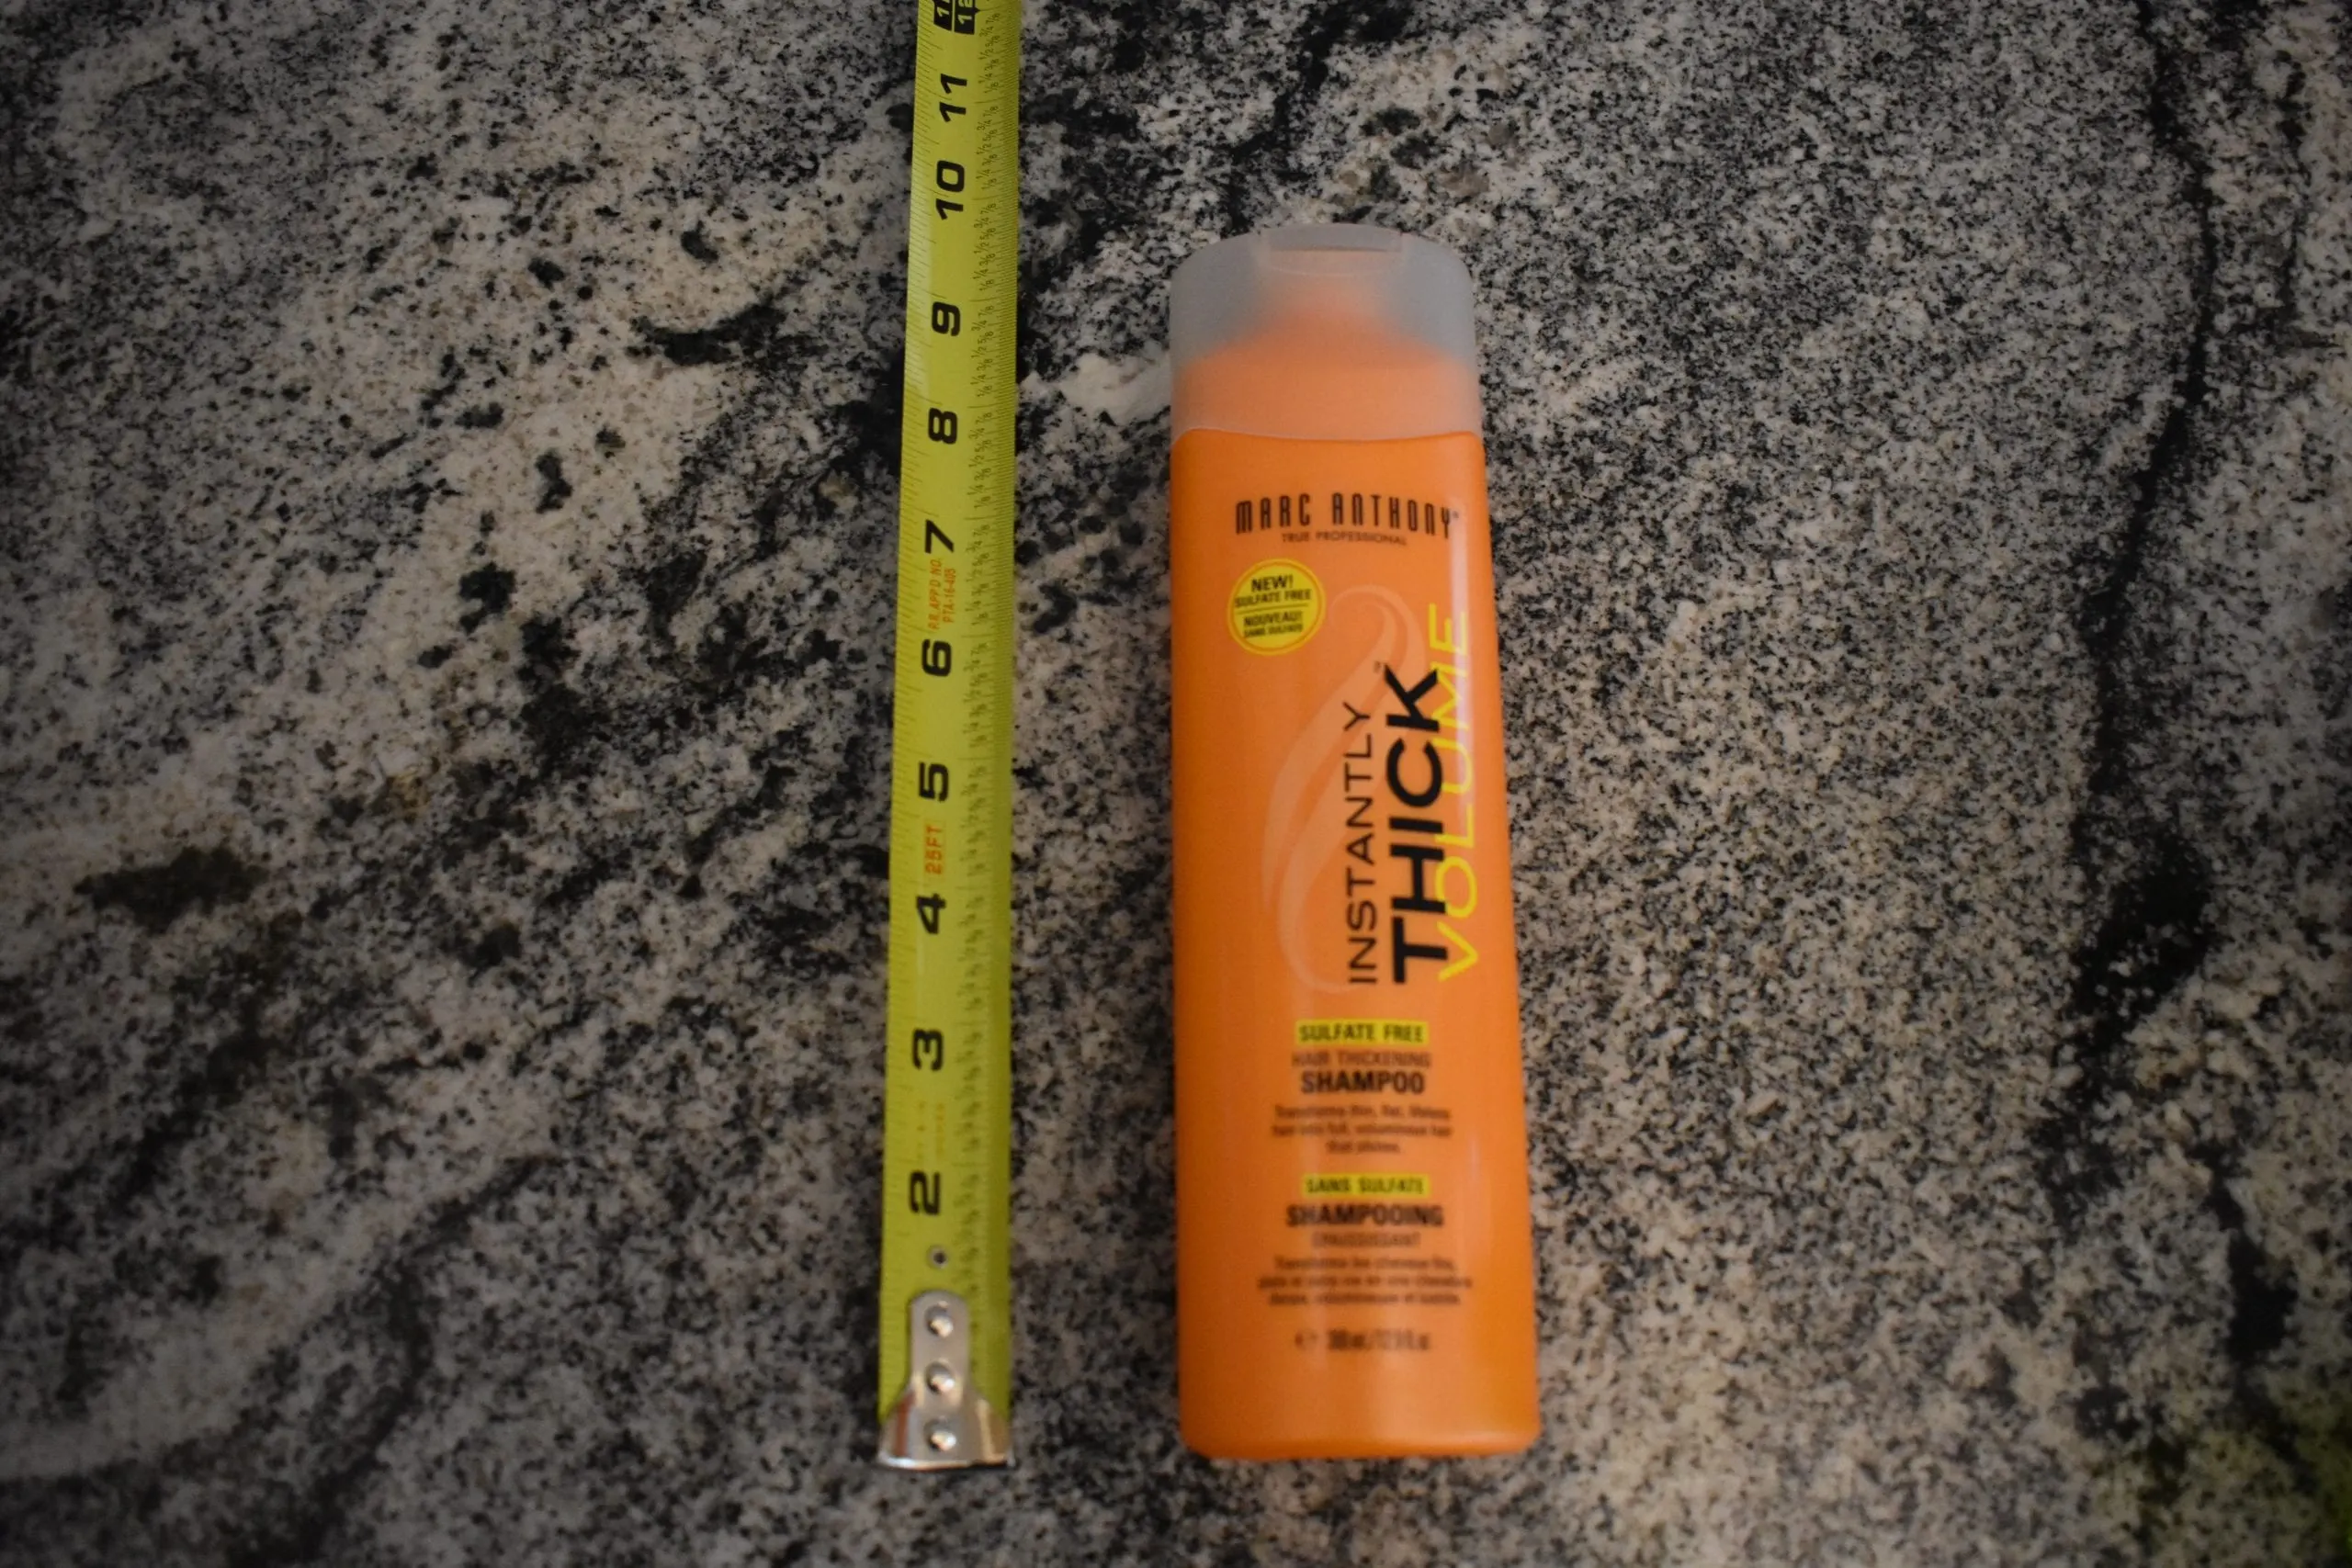 marc anthony thick hair shampoo next to a measuring tape on a granite counter